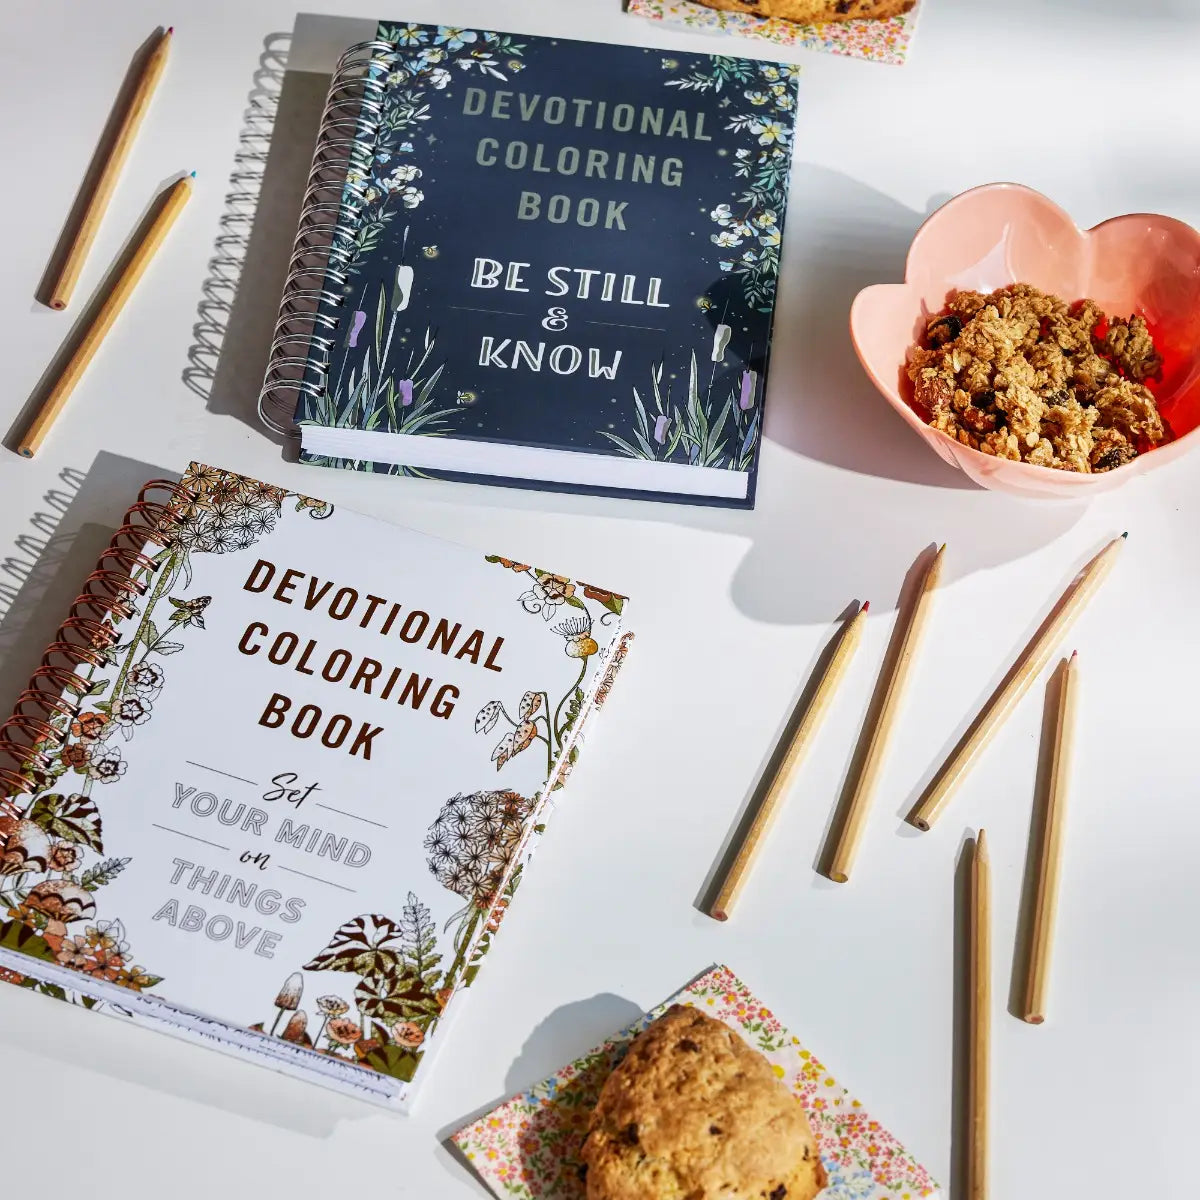 Be Still & Know: Devotional Coloring Book